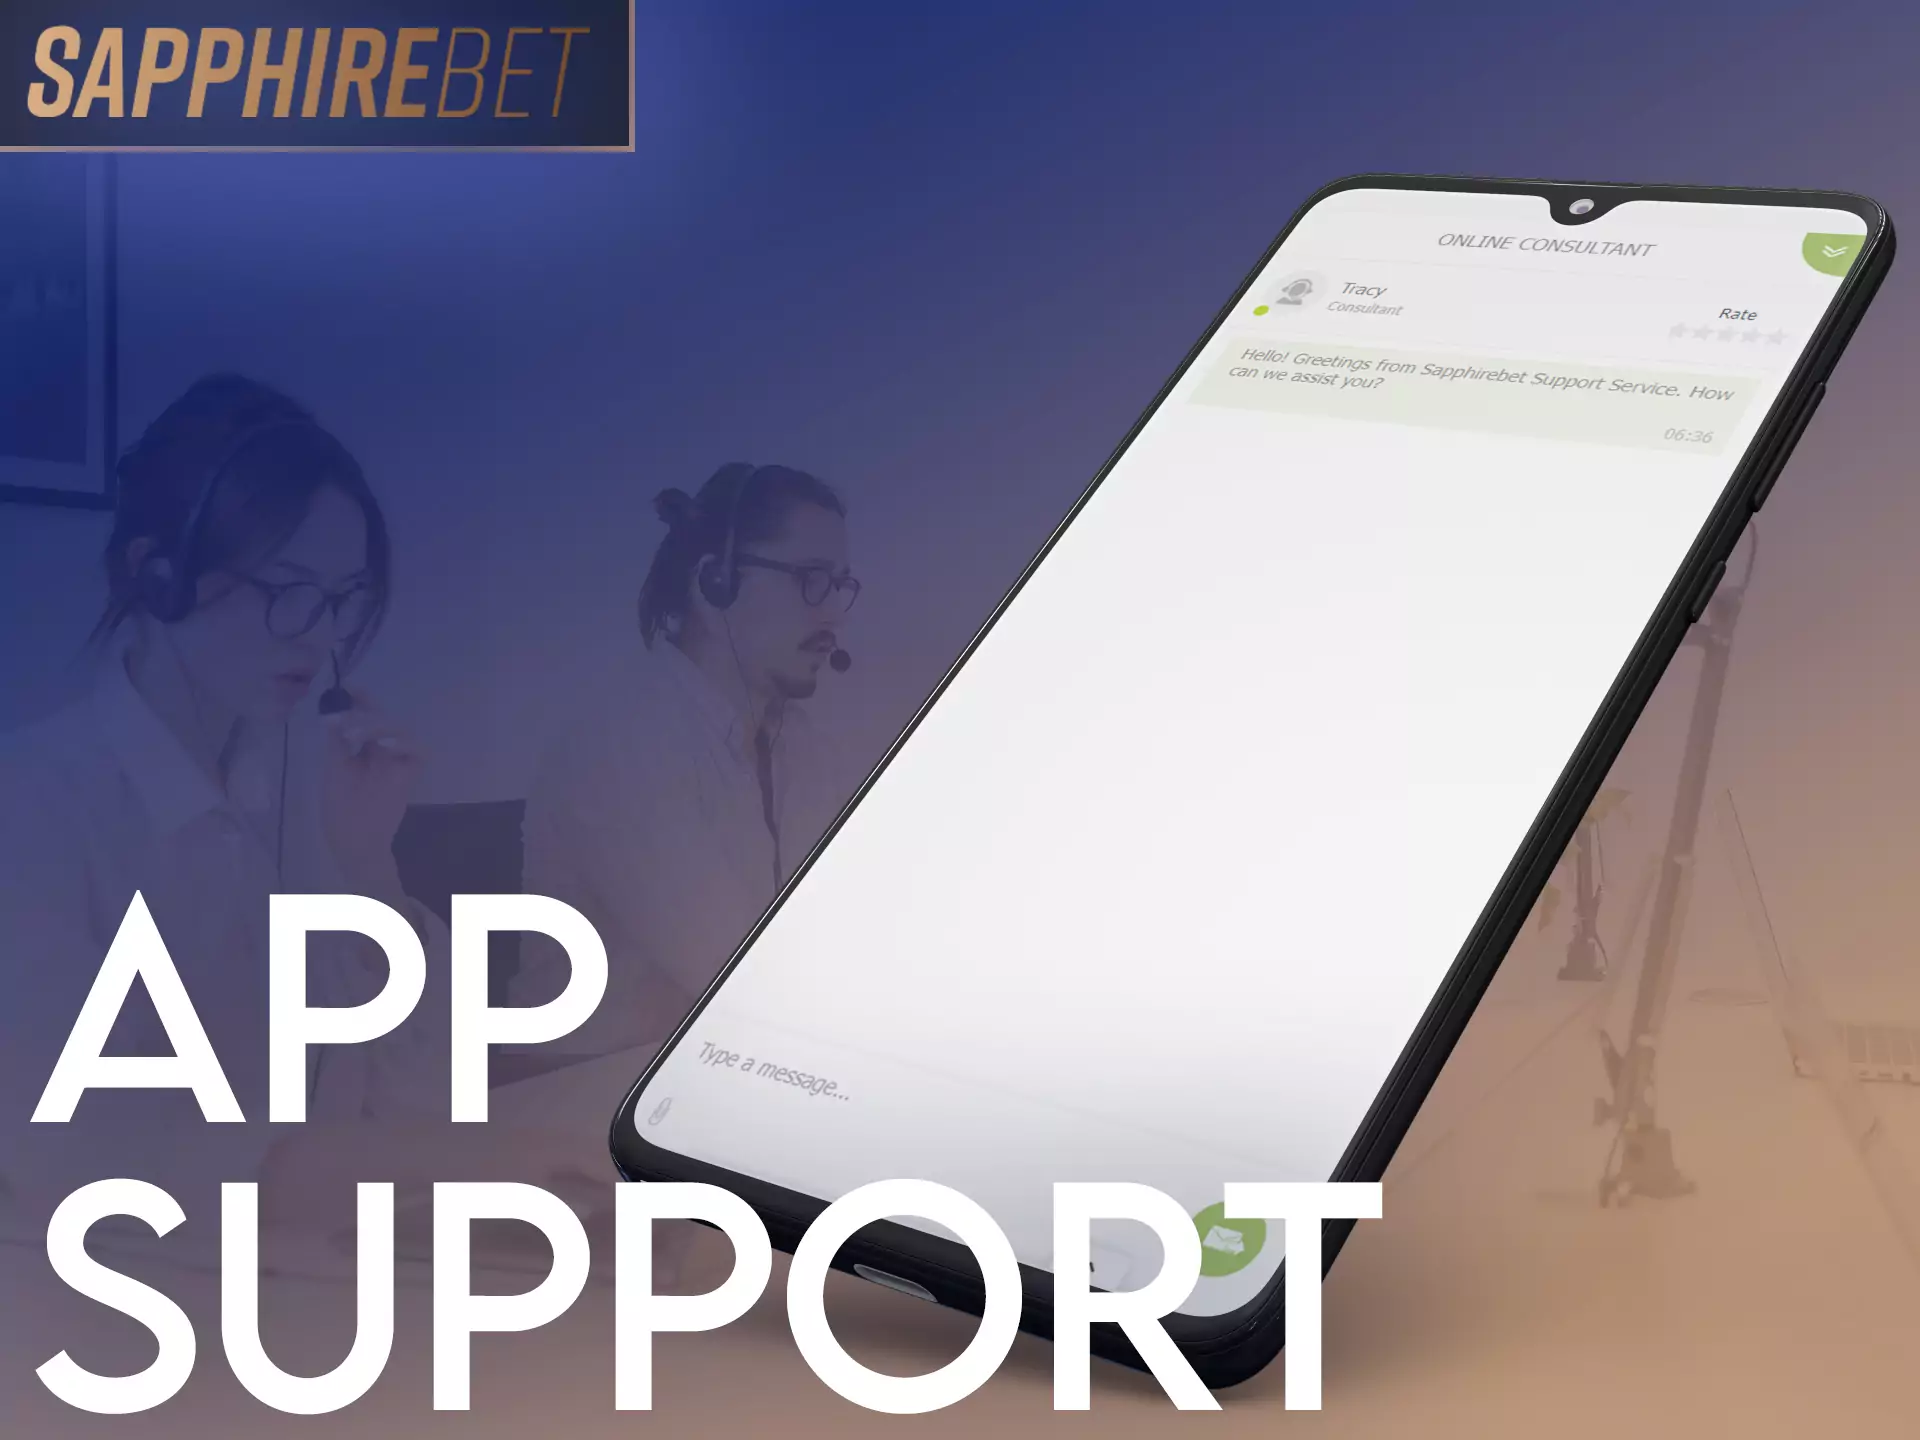 At Sapphirebet, the support staff is ready to answer all your questions at any time.